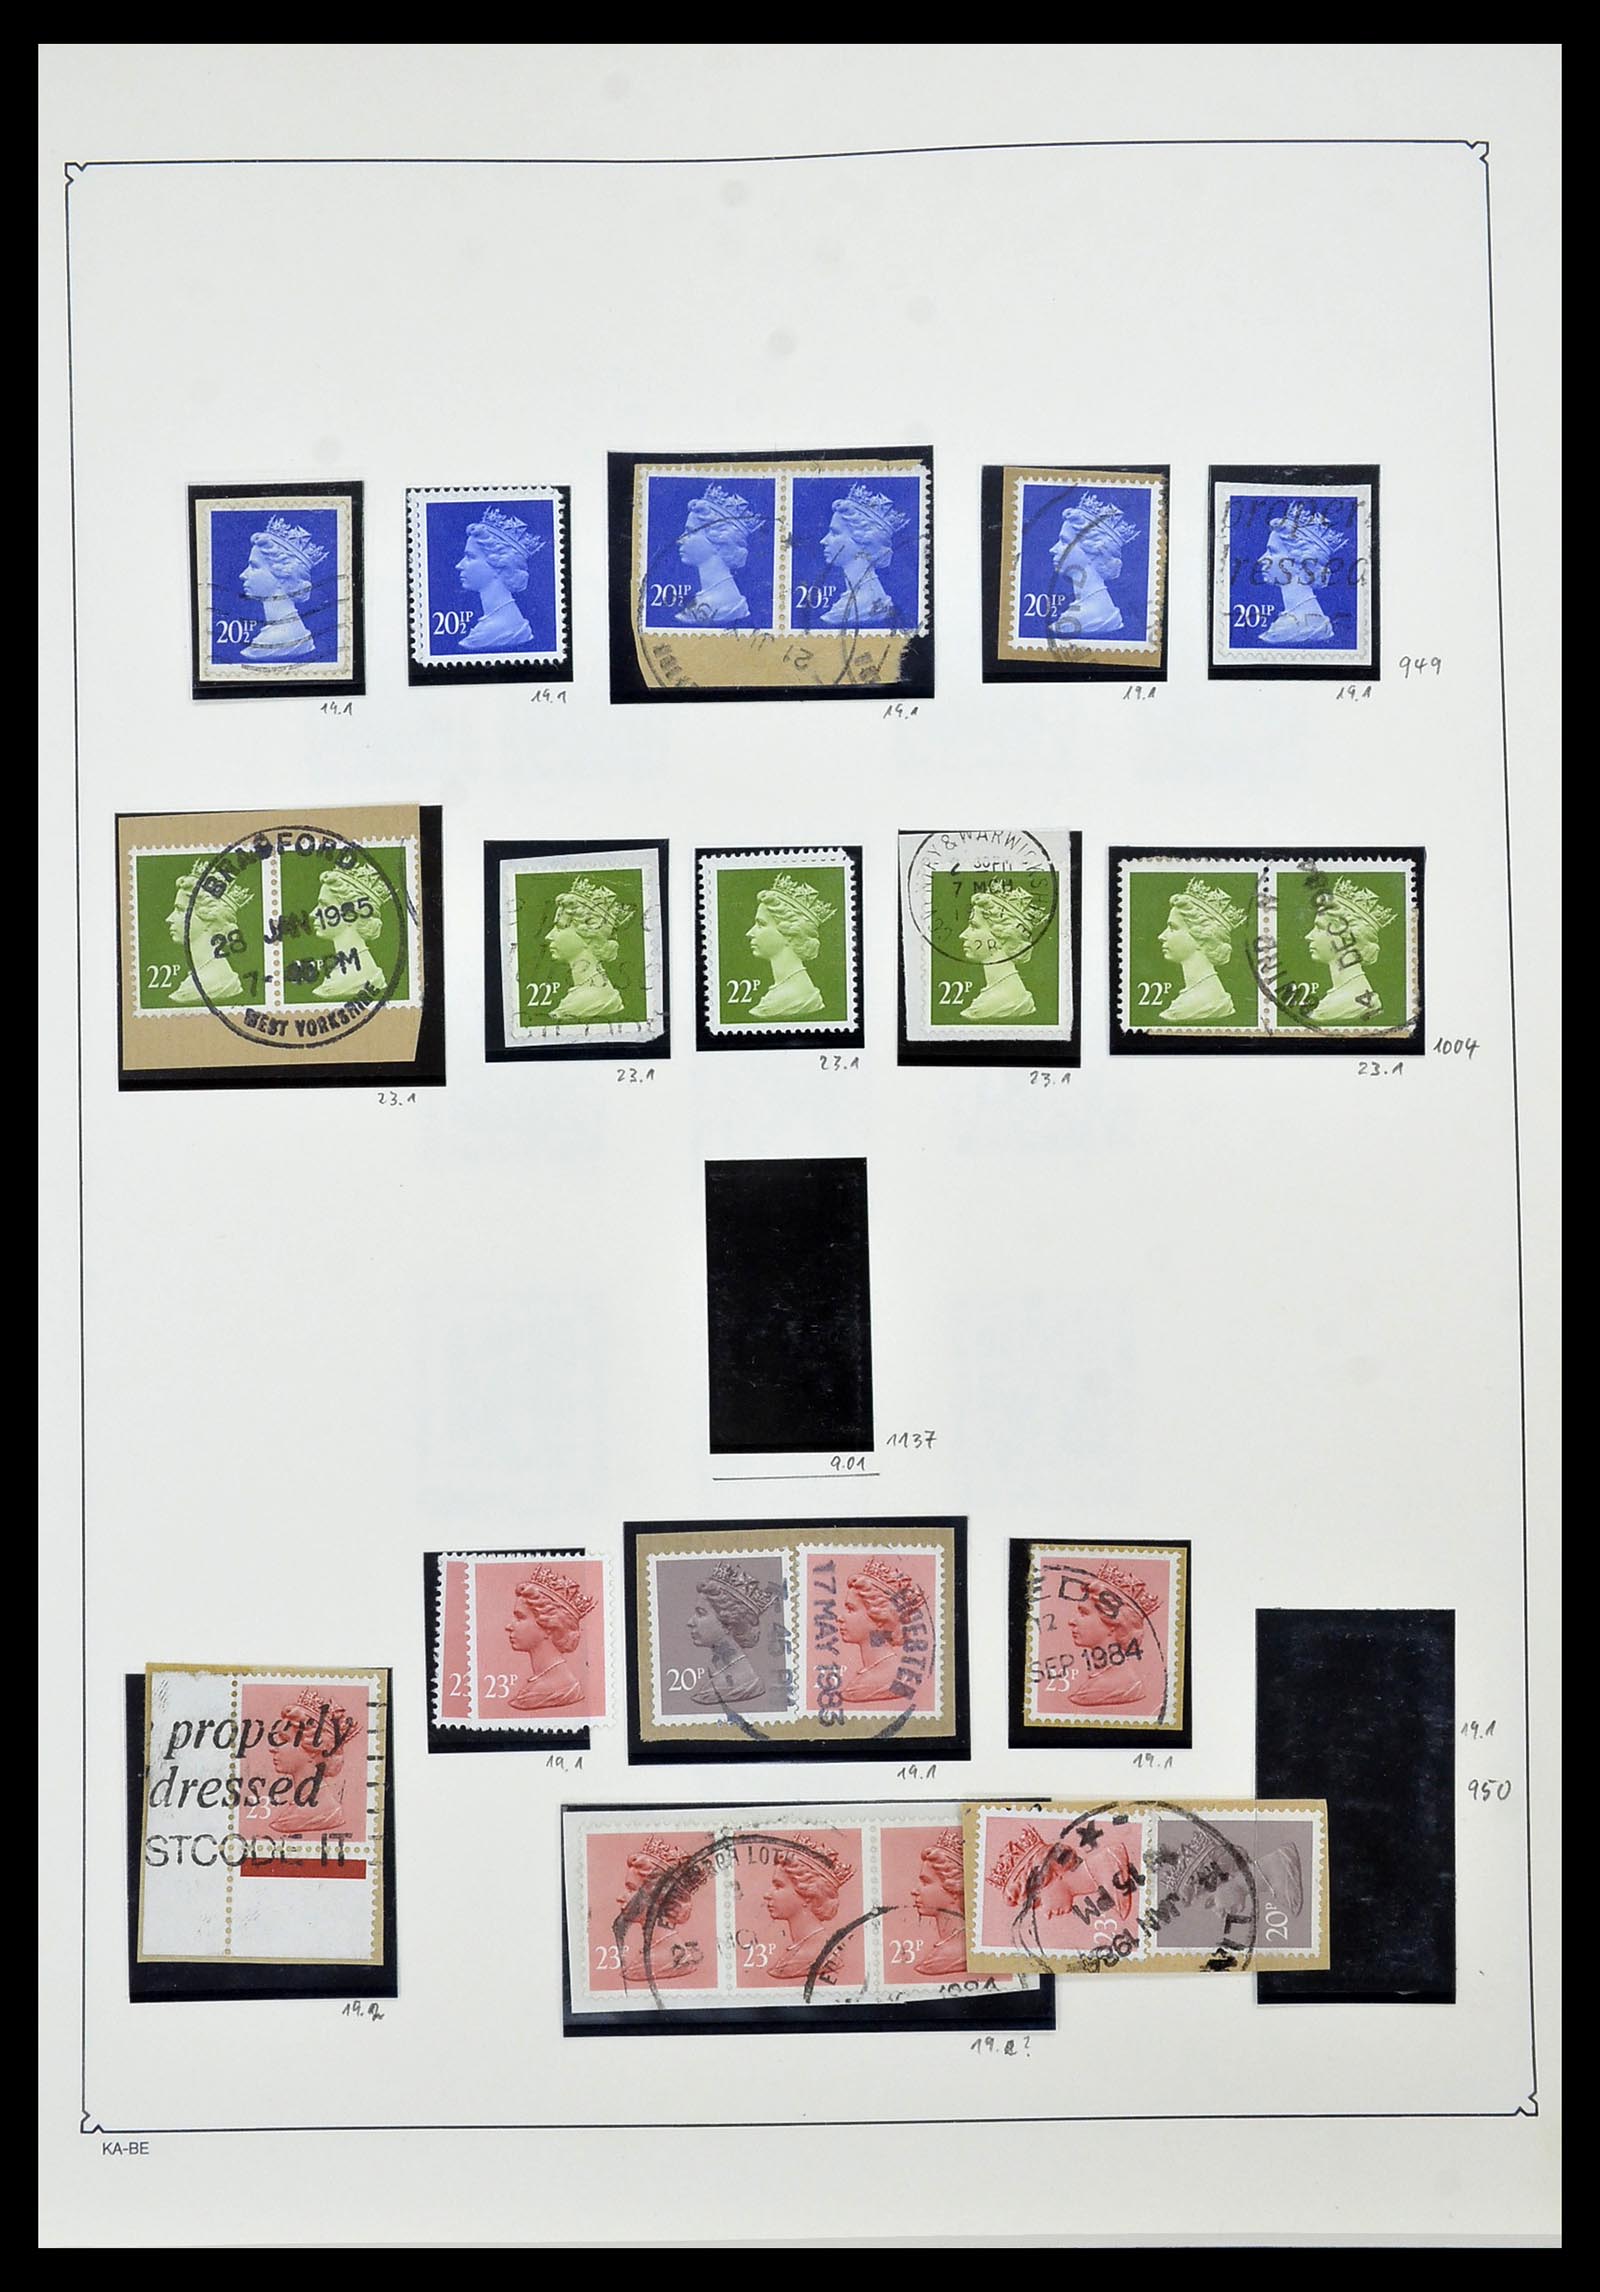 34221 095 - Stamp collection 34221 Great Britain Machins/castles 1971-2005.